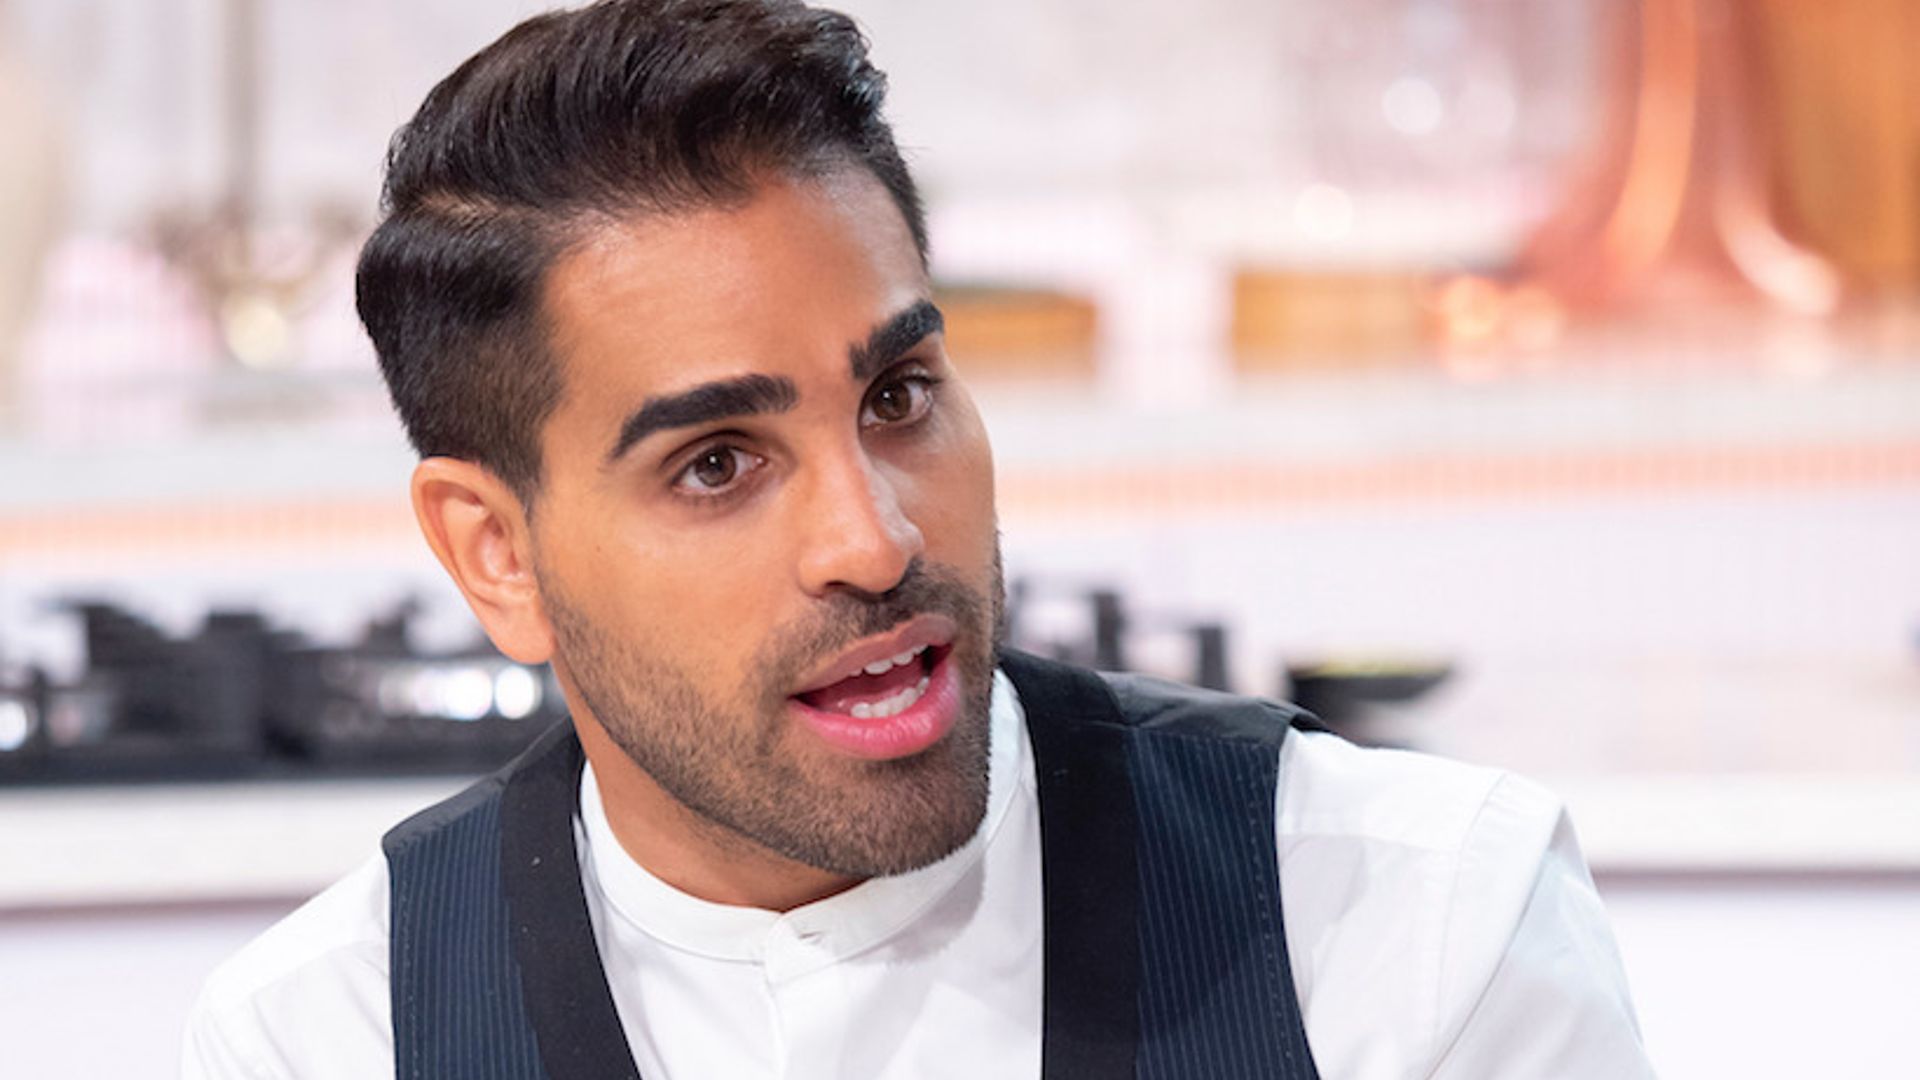 Dr Ranj Singh responds after selfie with Phillip Schofied’s rumoured lover resurfaces: ‘Inacurrate and unfair’